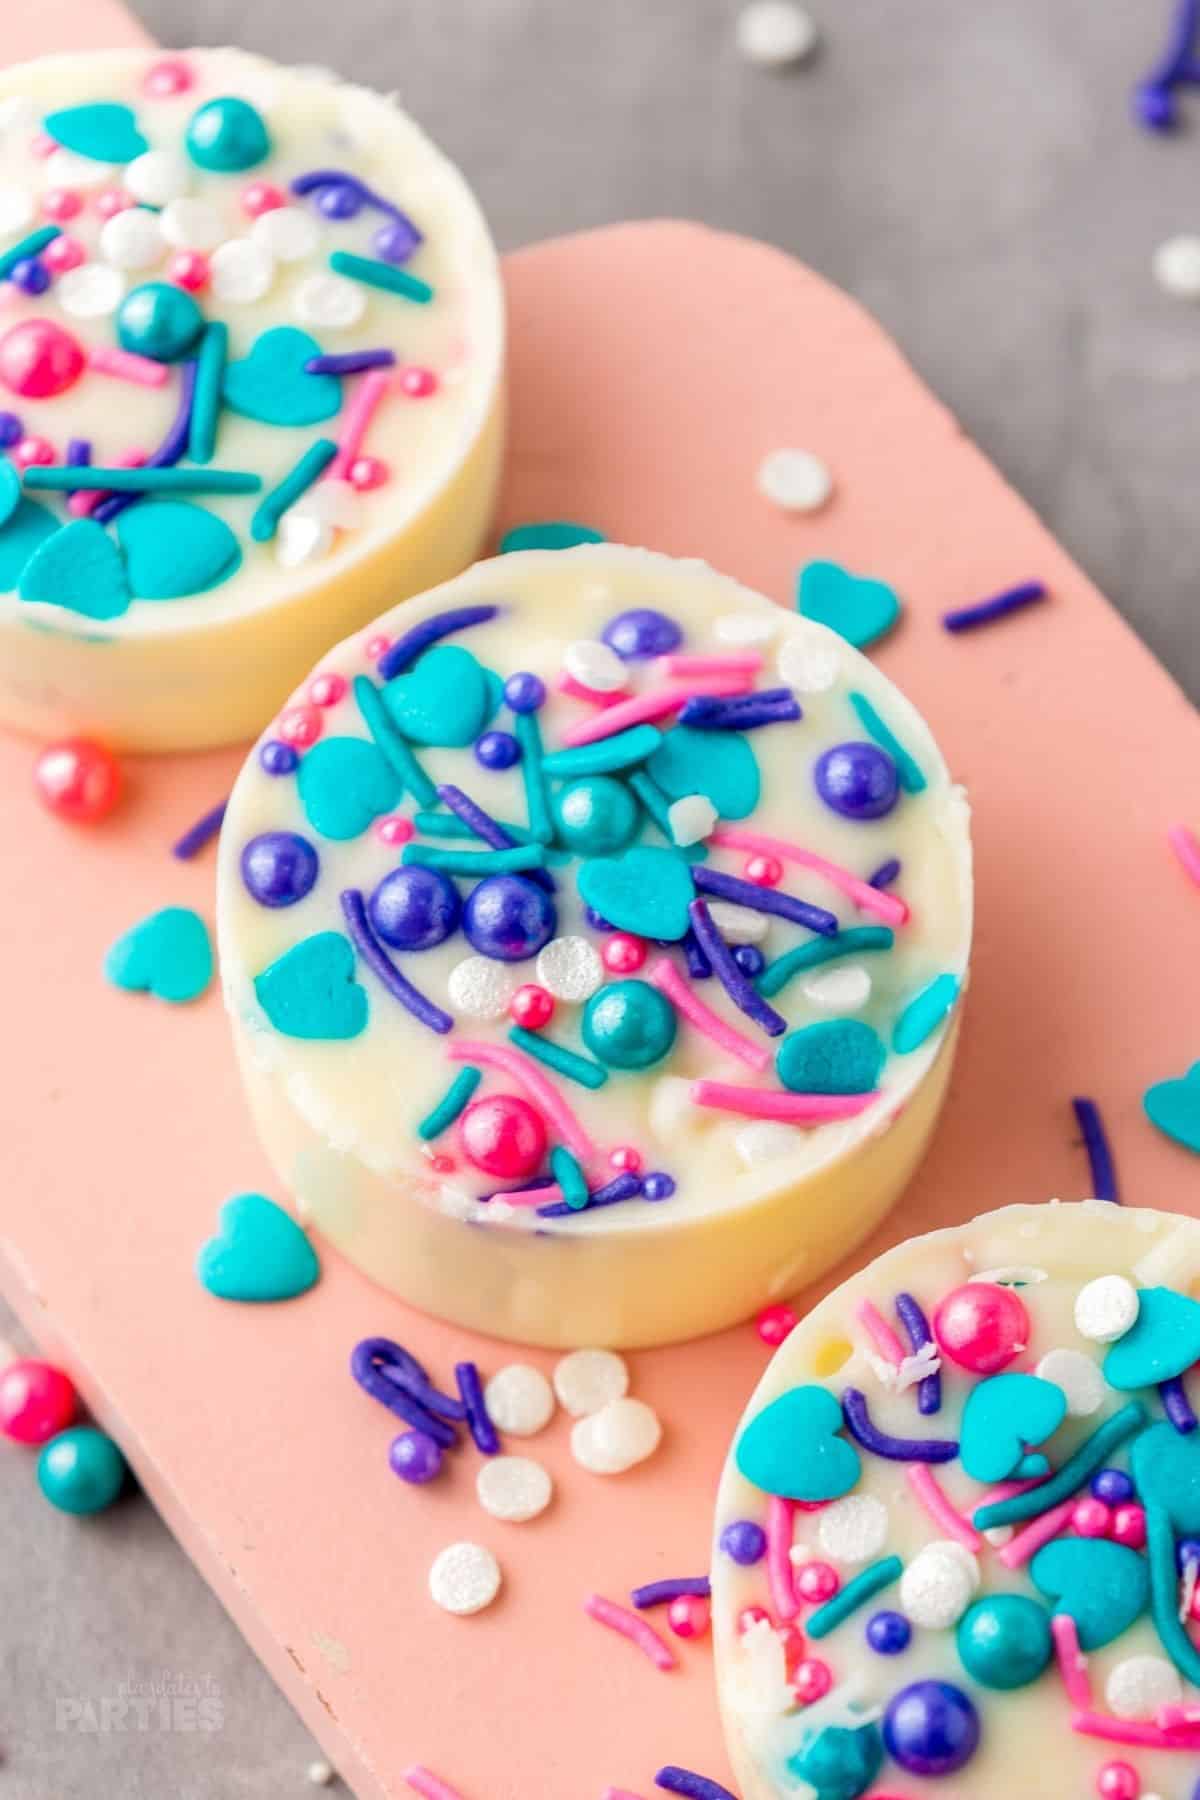 Three white chocolate covered Oreos covered in sprinkles sit on a pink board